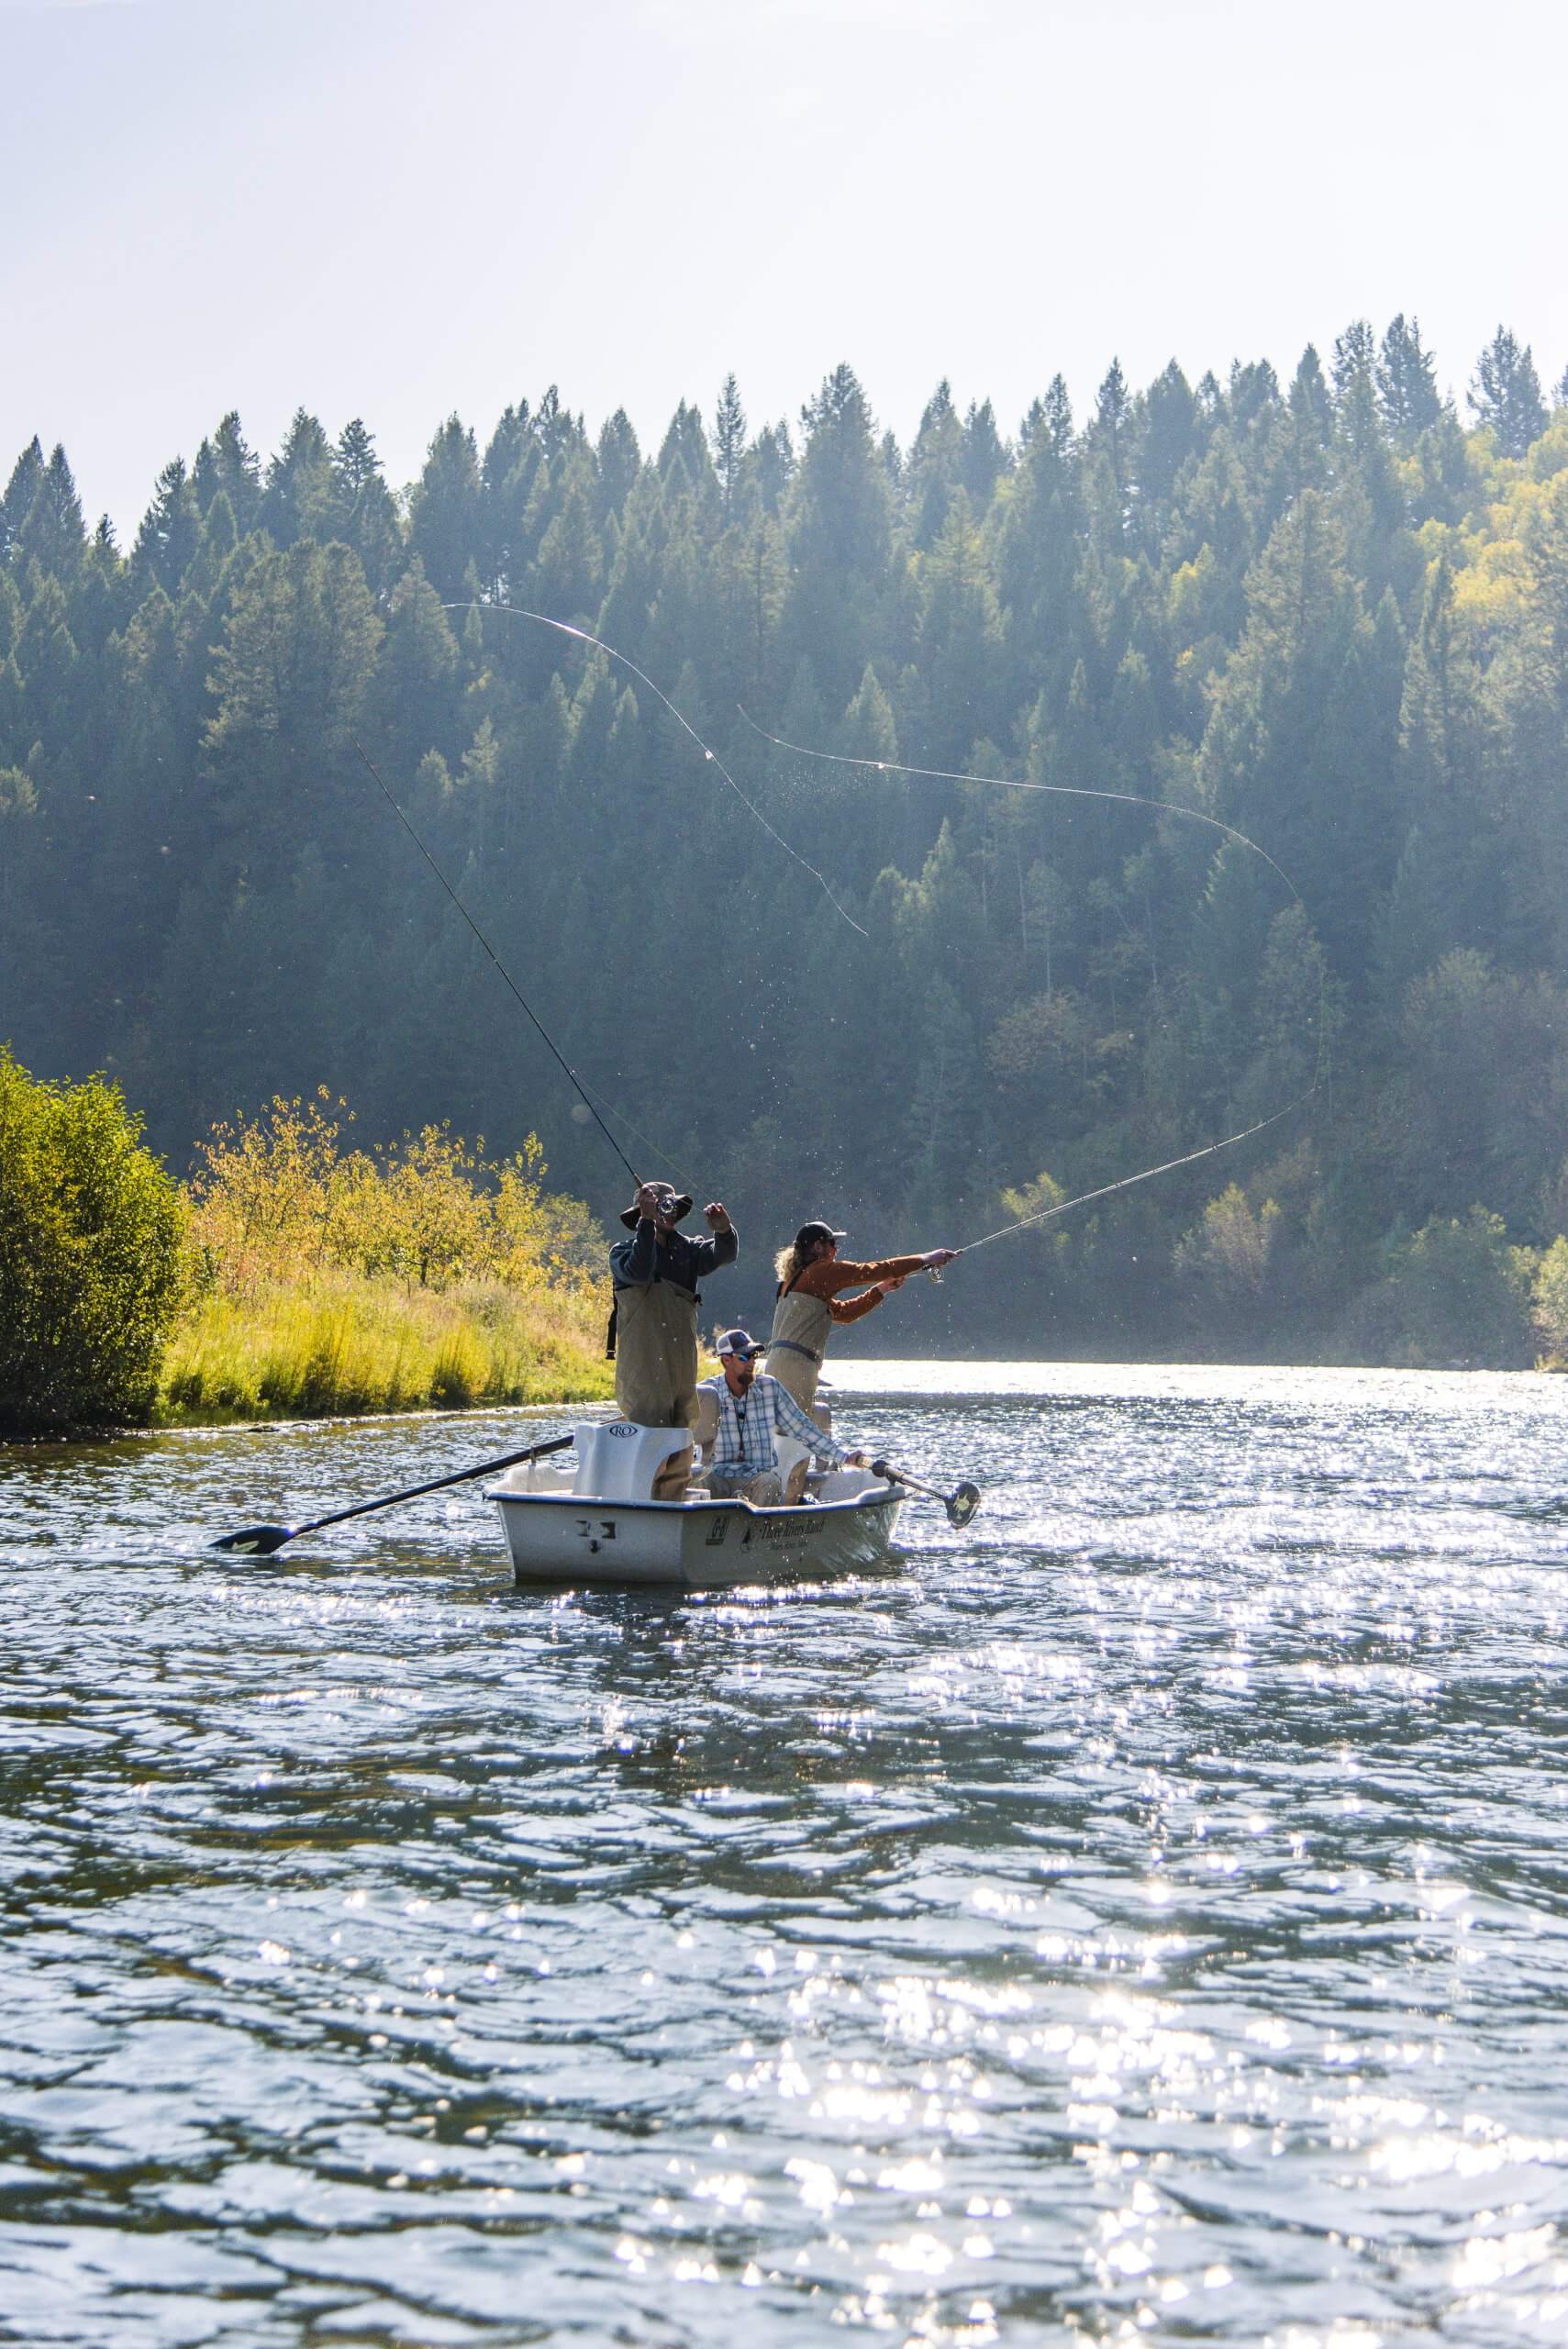 Three people fly fishing in a small boat on Henry's Fork of the Snake River, with a forest in the background.